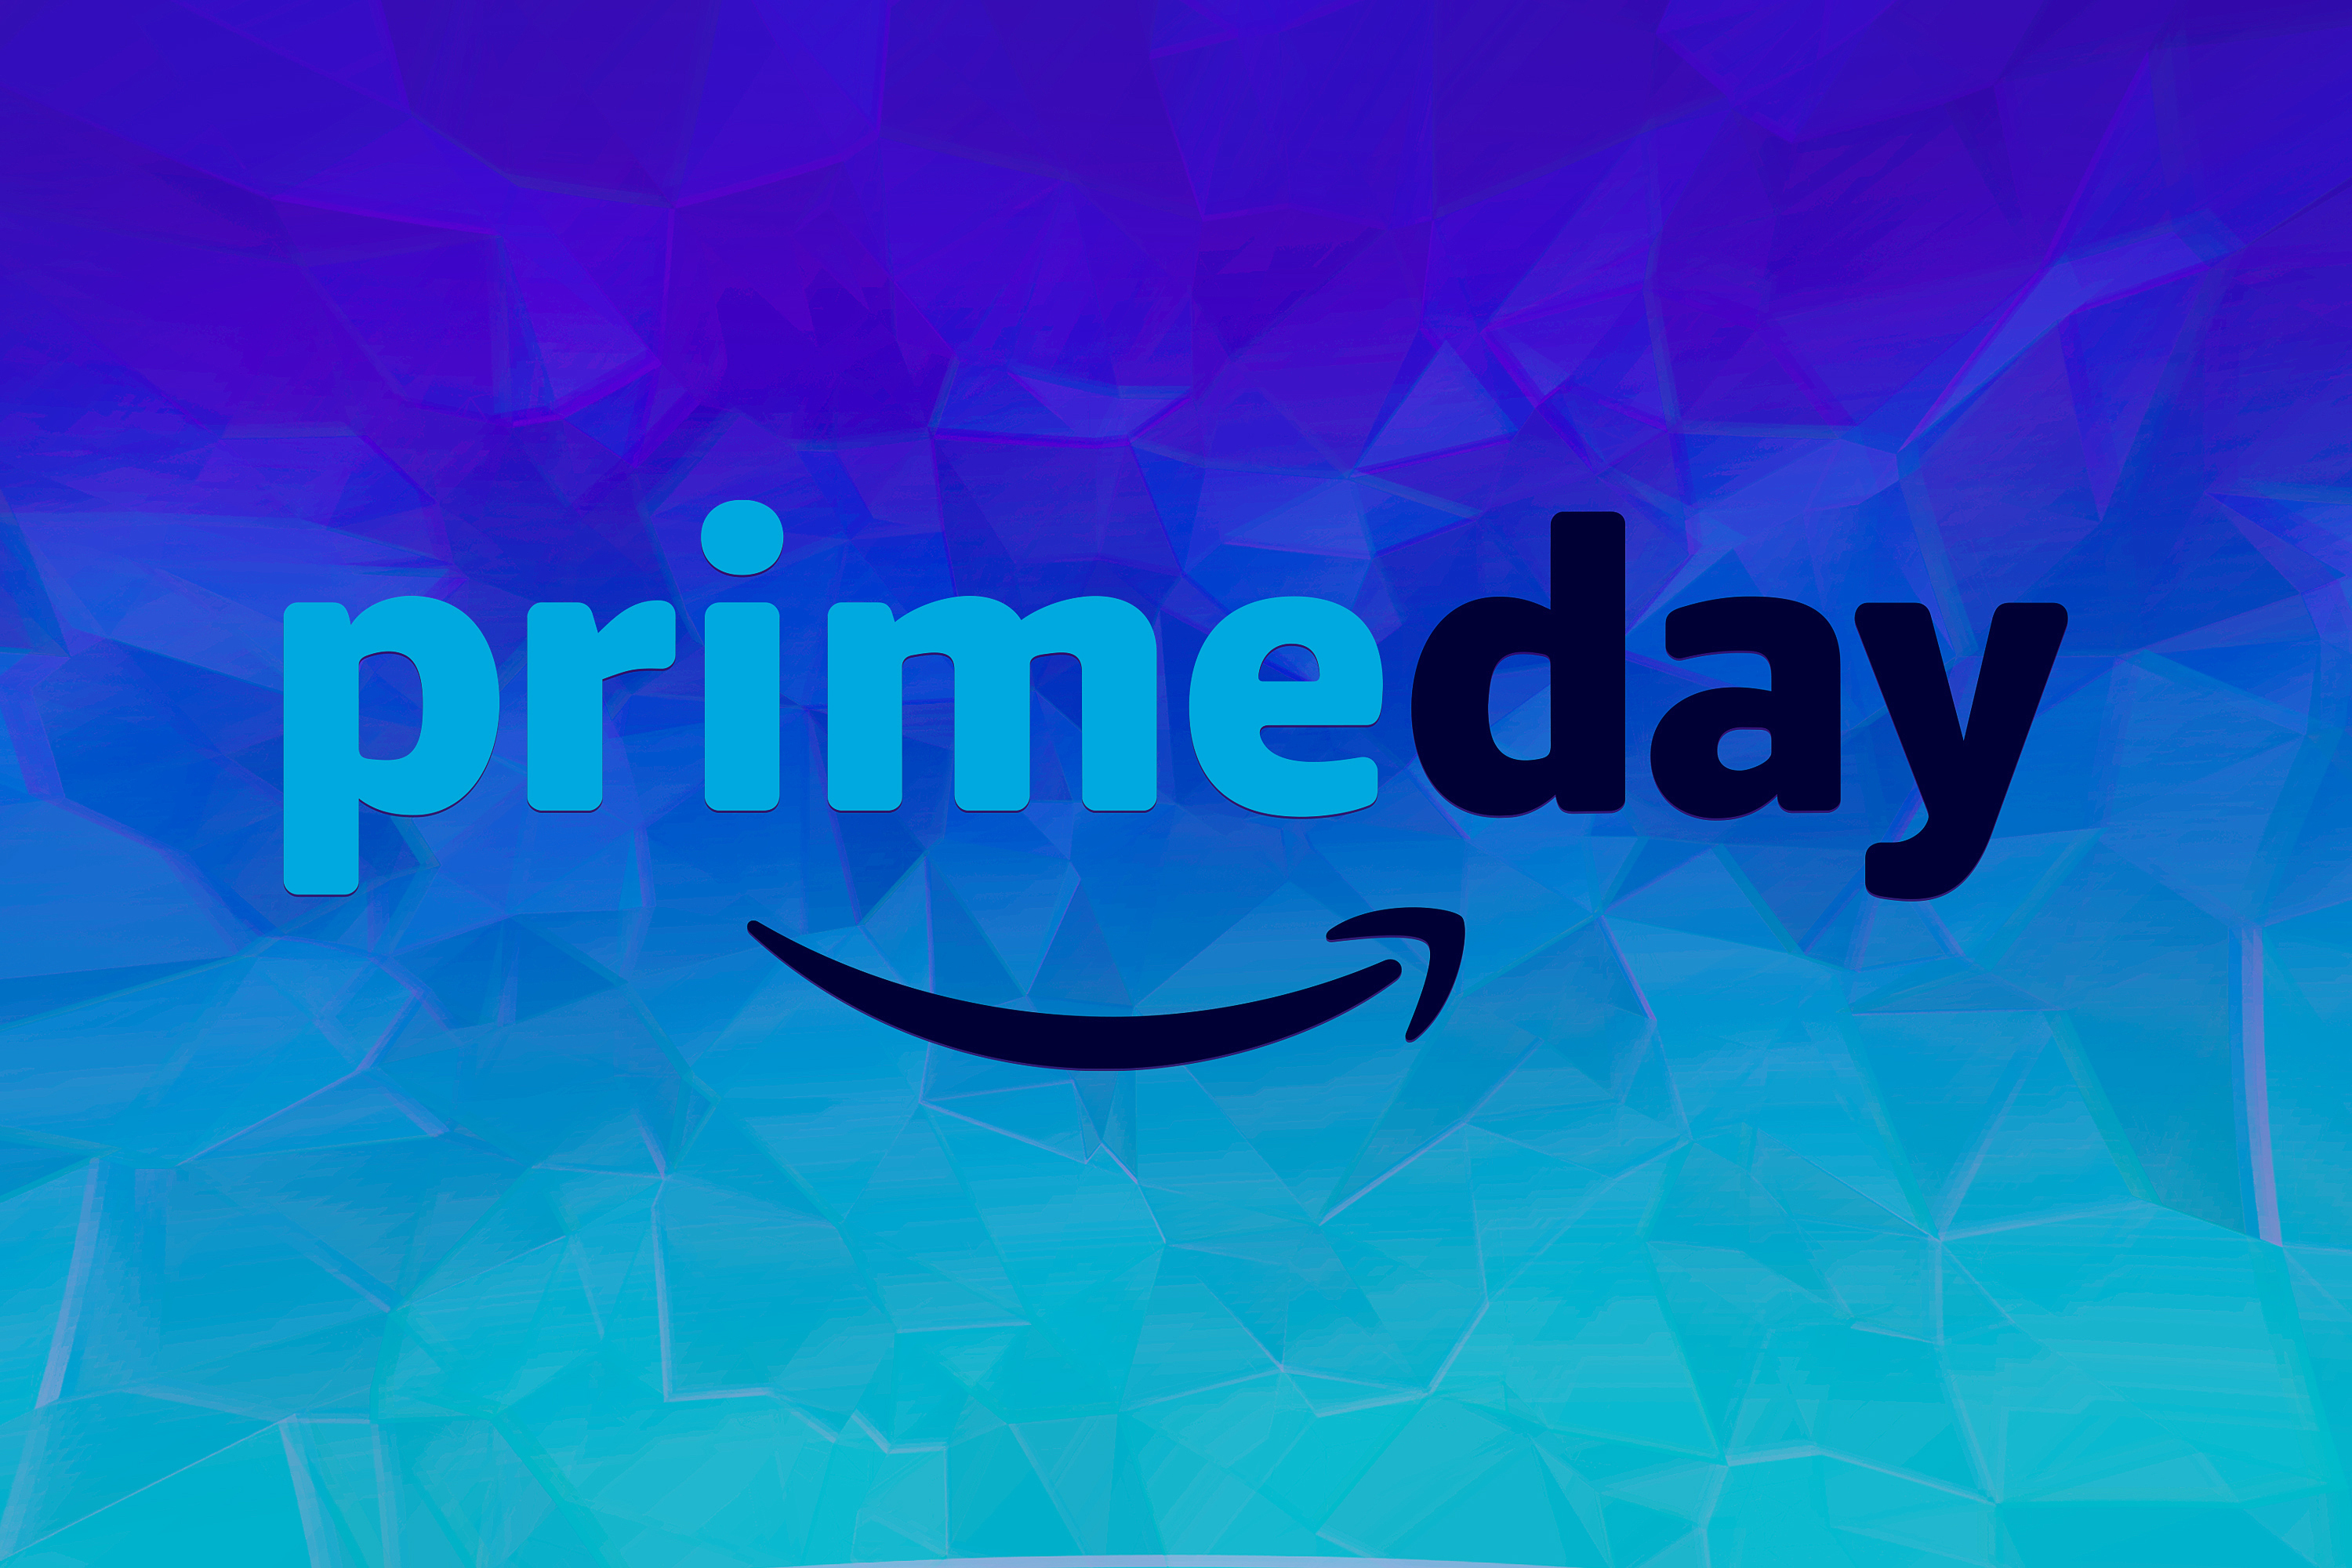 Graphic background with Amazon “prime day” logo